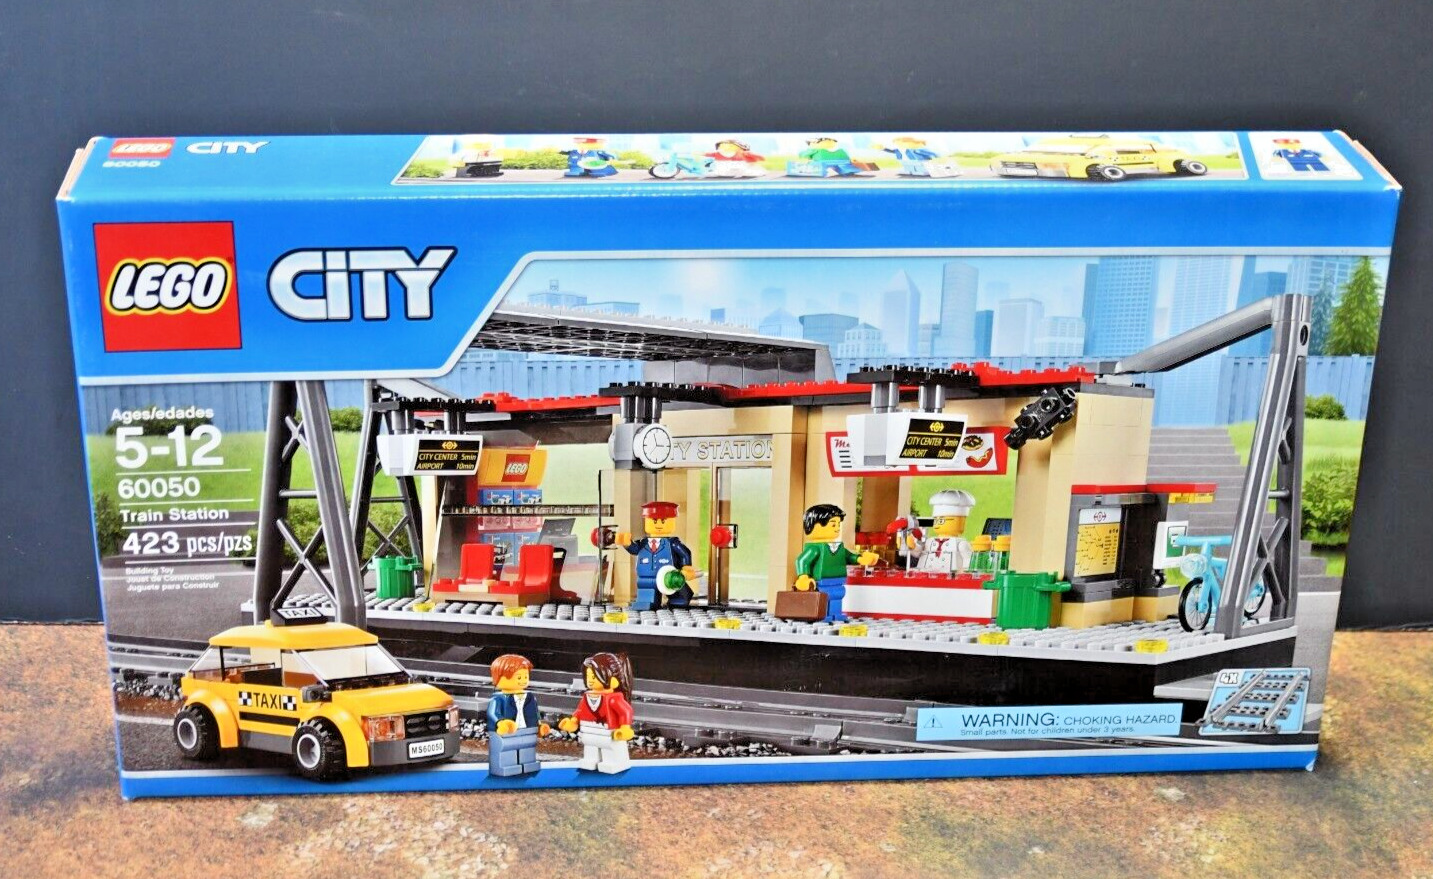 LEGO City 60050 Train Station Brand New In Box RARE Free Shipping